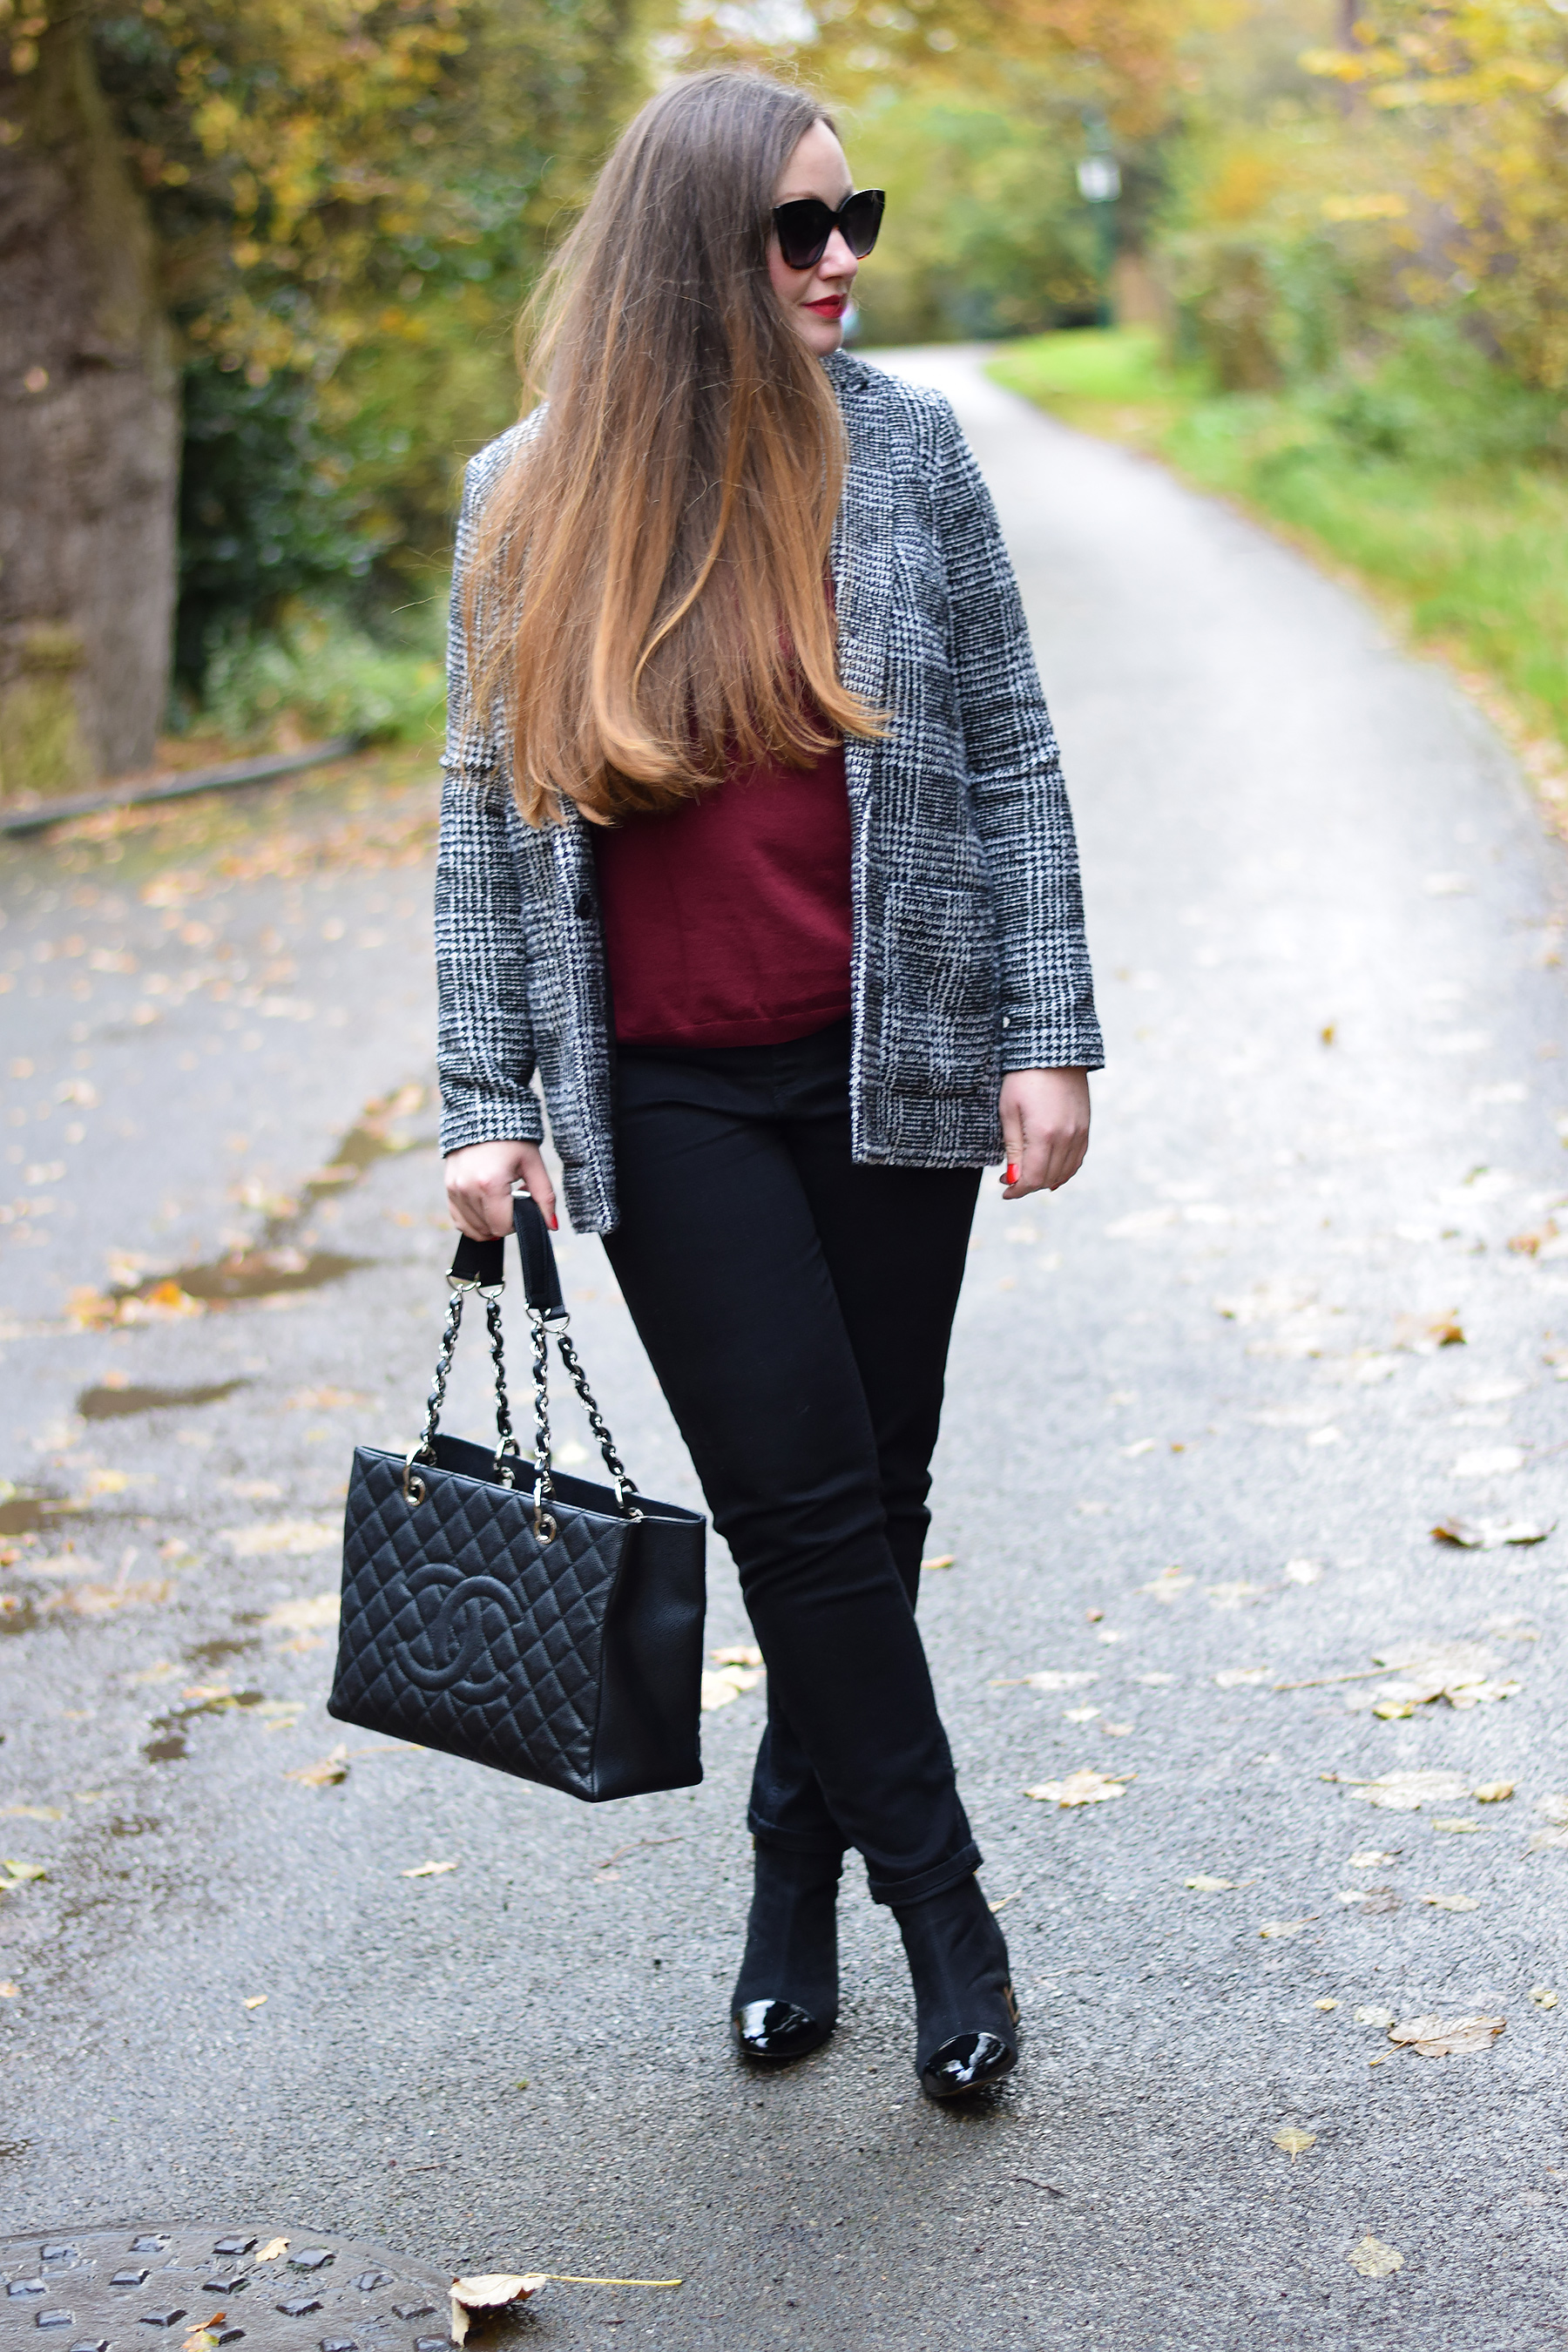 Burgundy sweater with black jeans and checked jacket